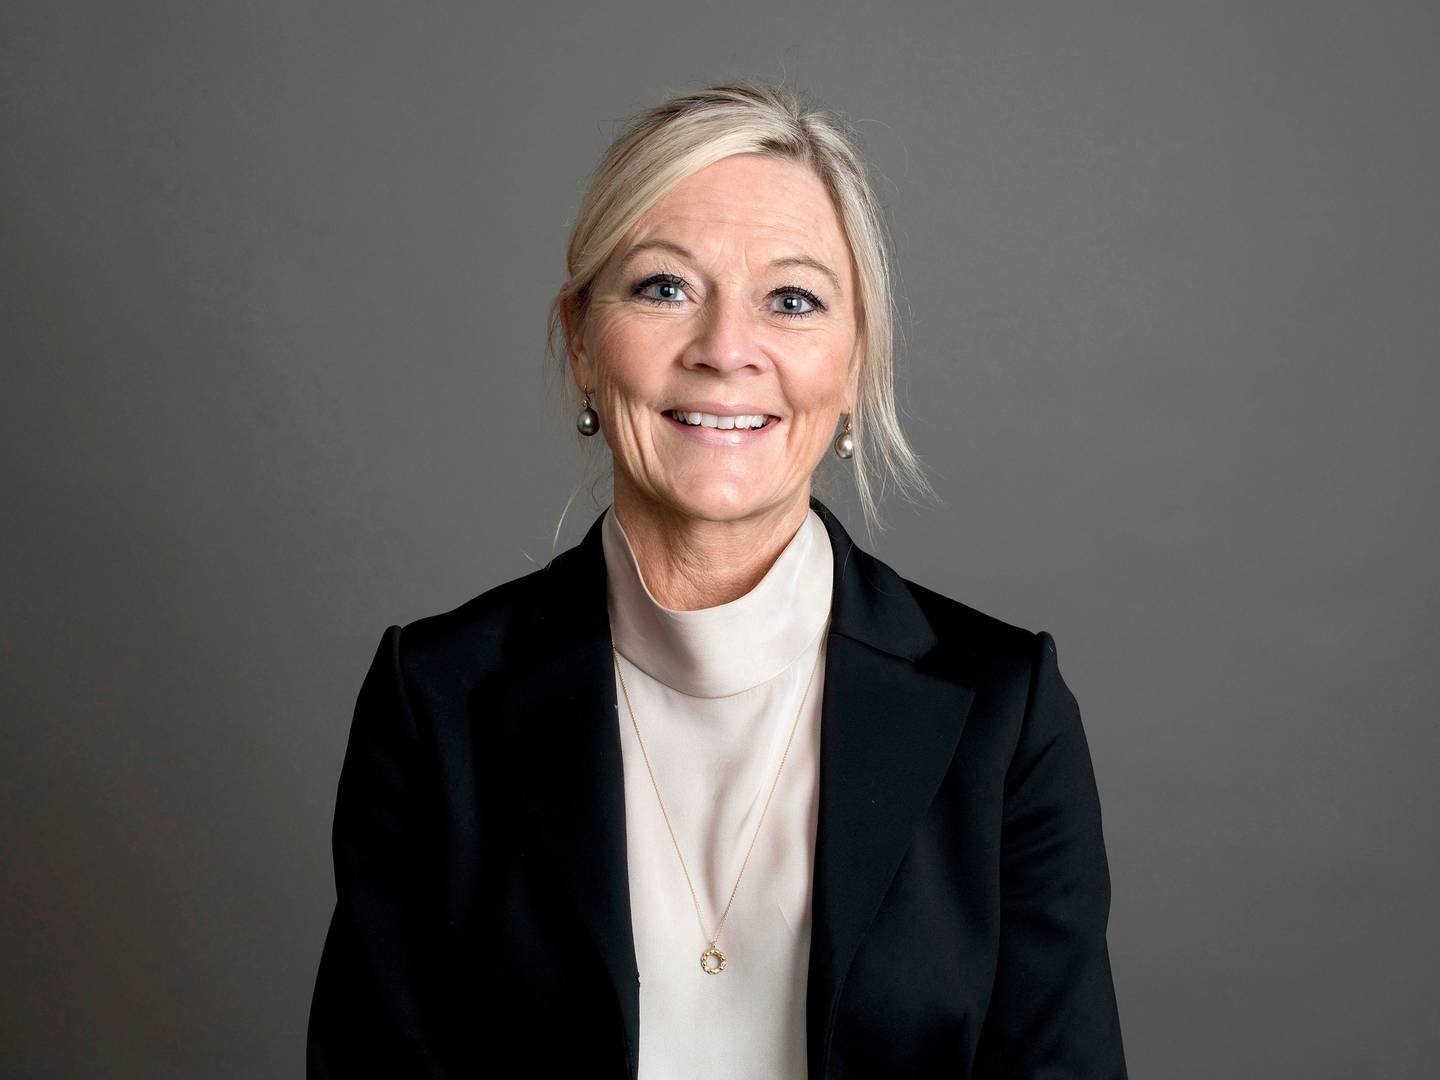 Danish Shipping has no intention of abandoning its own goals for more women in shipping, even though the development has stalled, says CEO Anne W. Trolle. | Photo: Danske Rederier